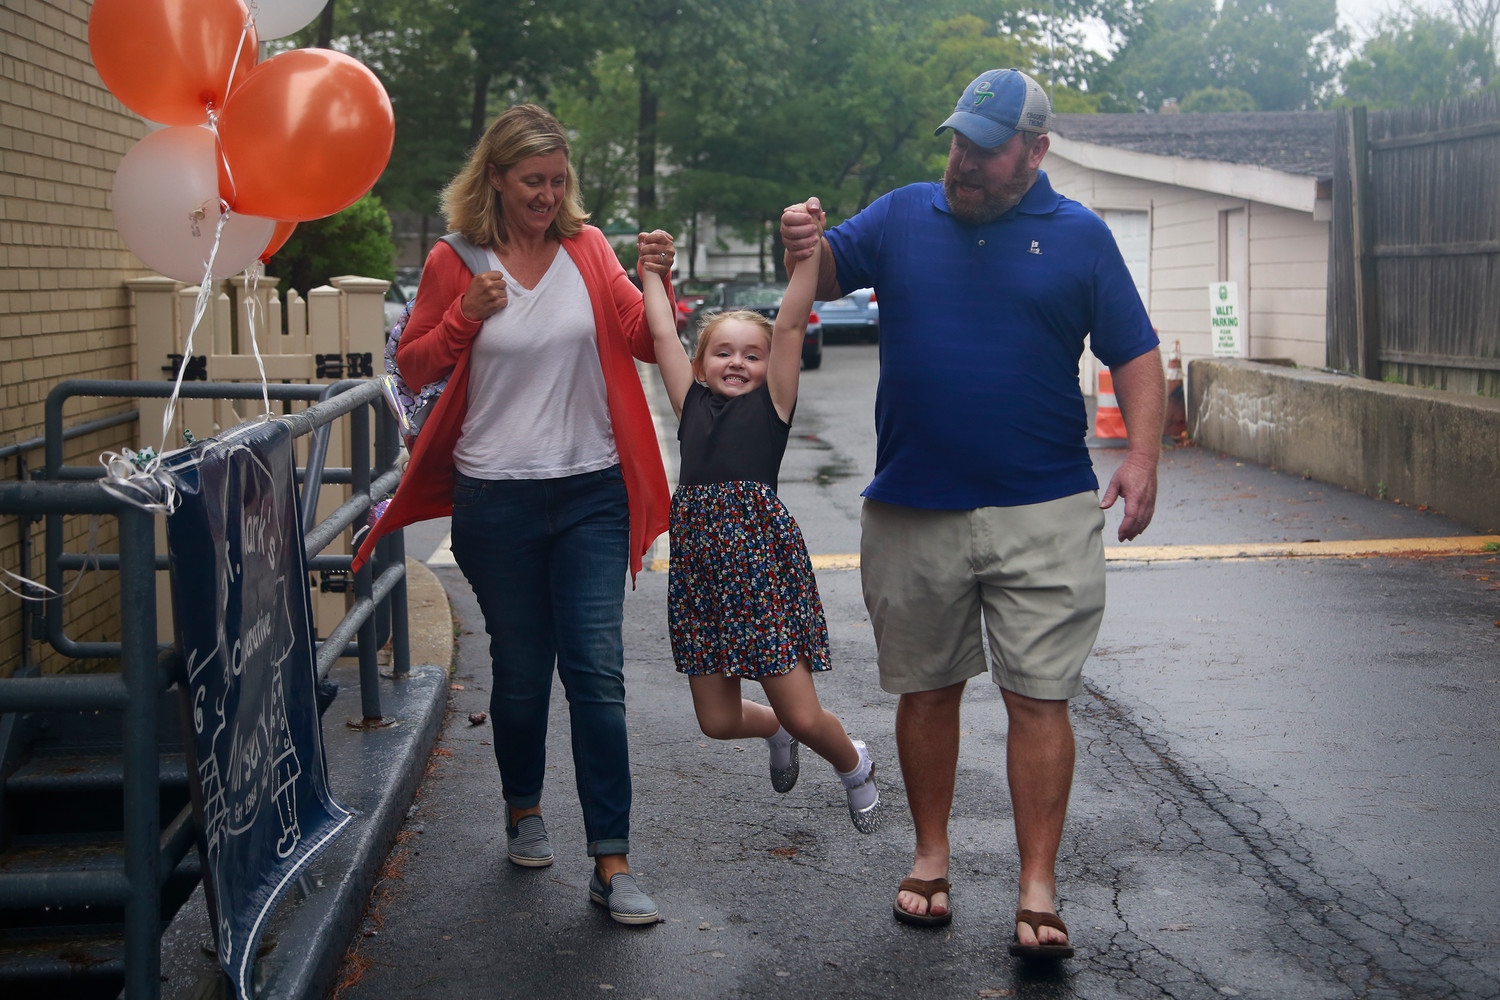 Liz and Chris O’Keefe swung their daughter, Abby, as they walked her to her first day of nursery school last month.